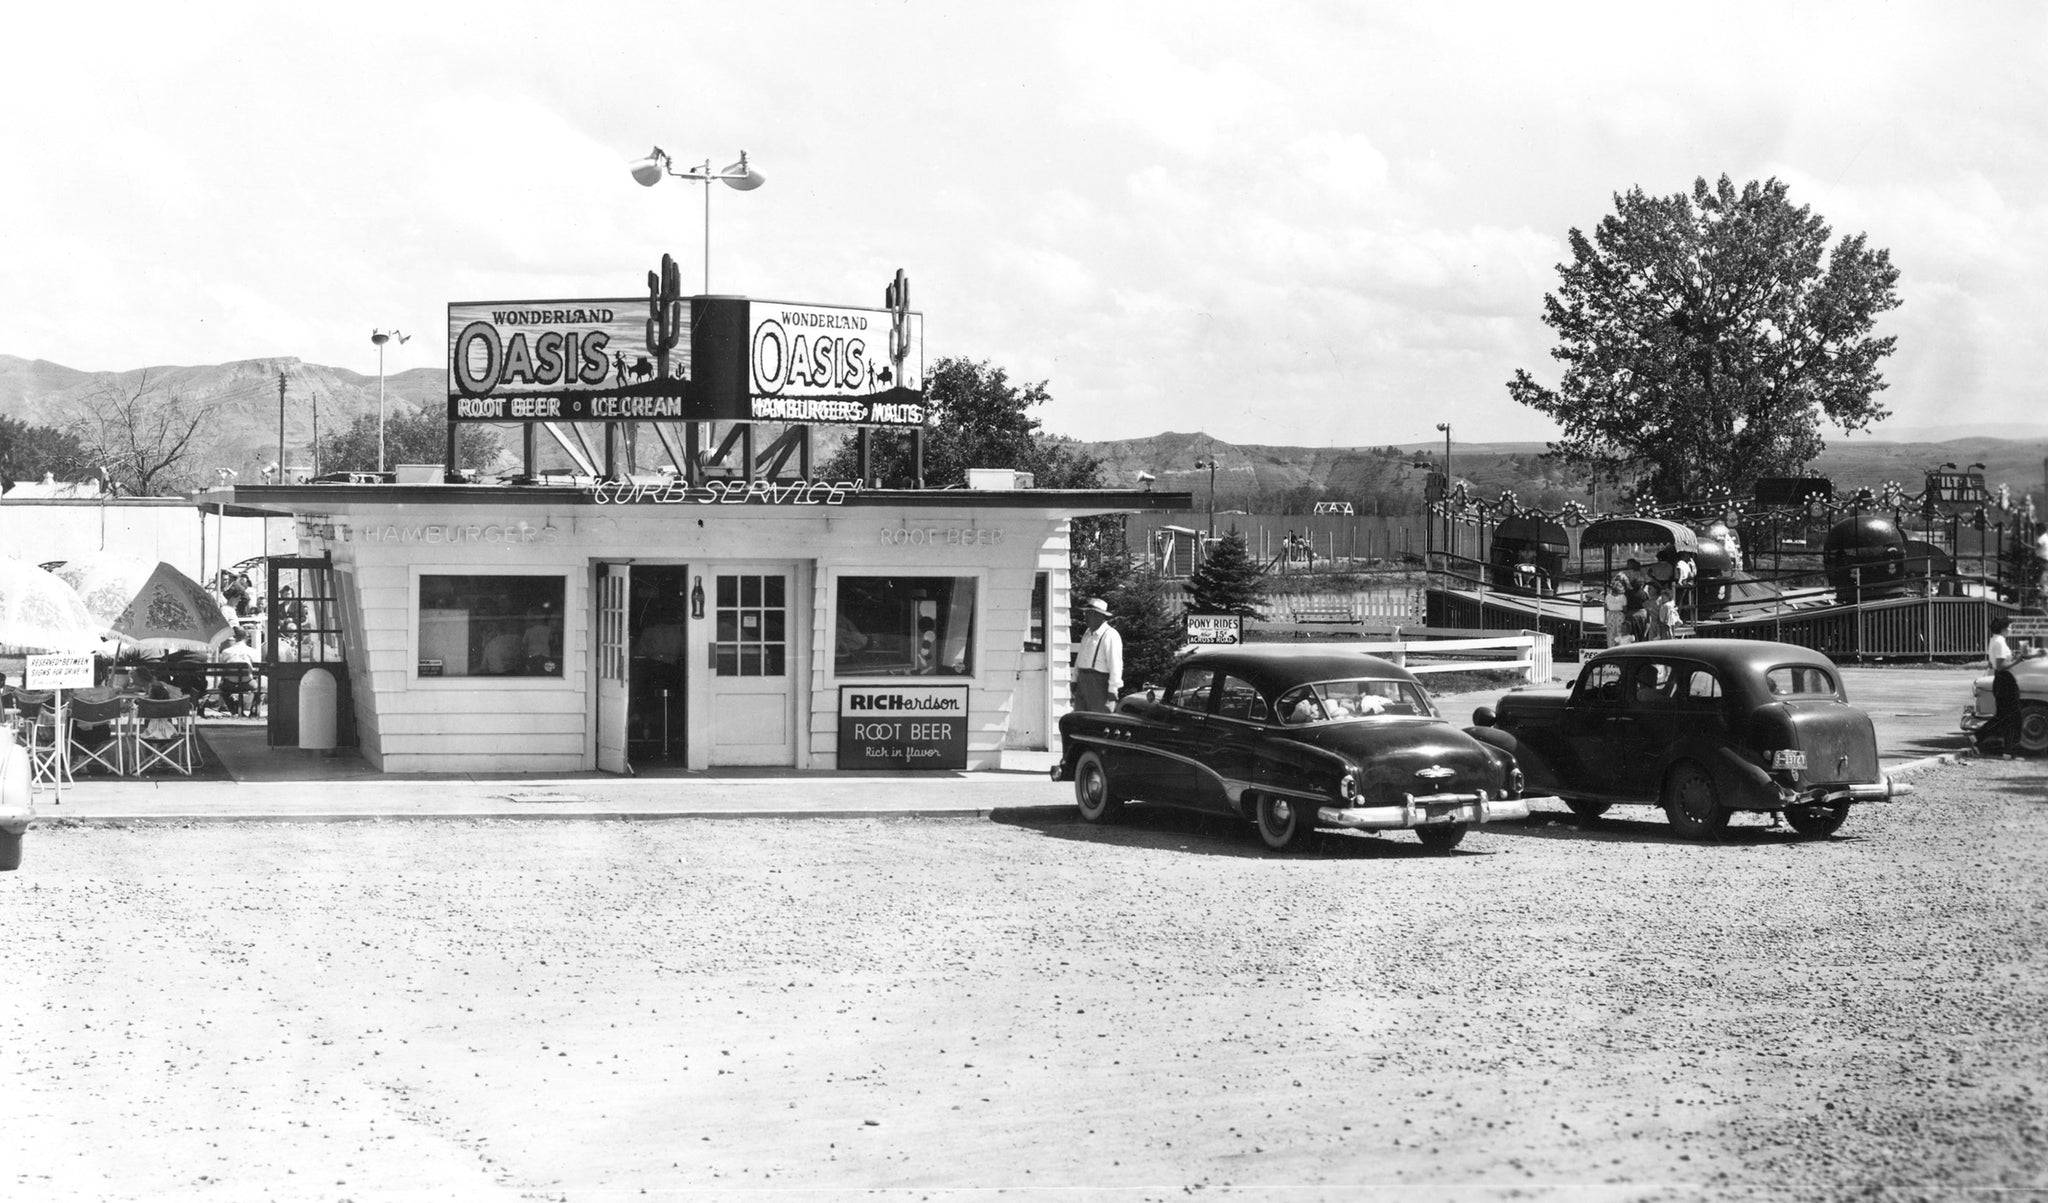 The Oasis drive-in cafe at Wonderland amusement park, 1950s. It served hamburgers, malts, ice cream, and root beer. -- Jim Reich